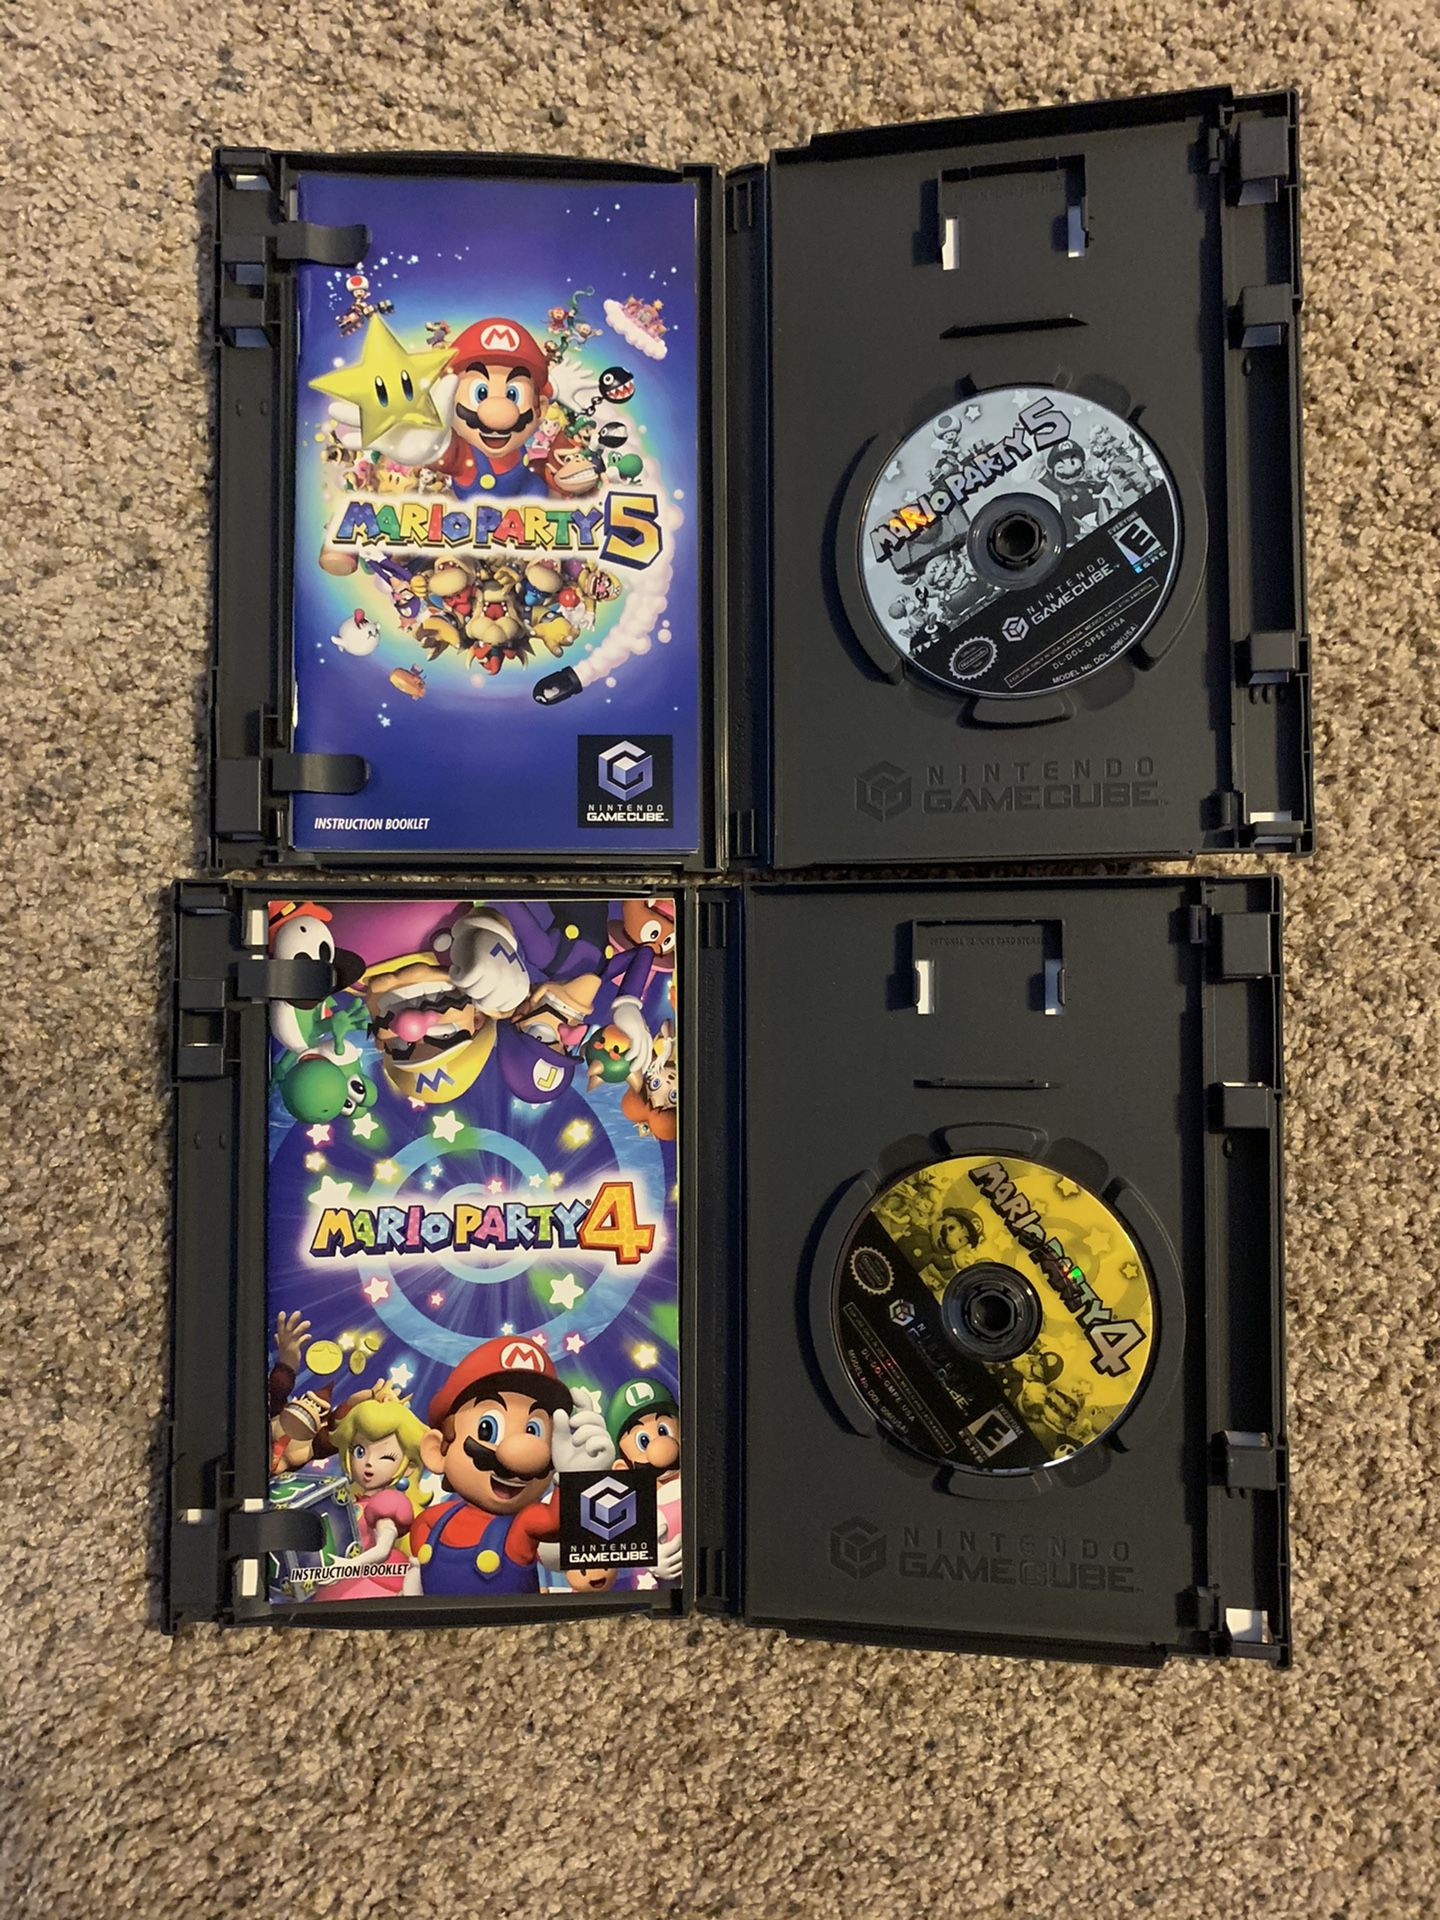 Mario party 4 & 5 GameCube Complete in Box! Guaranteed to work condition is solid!!!